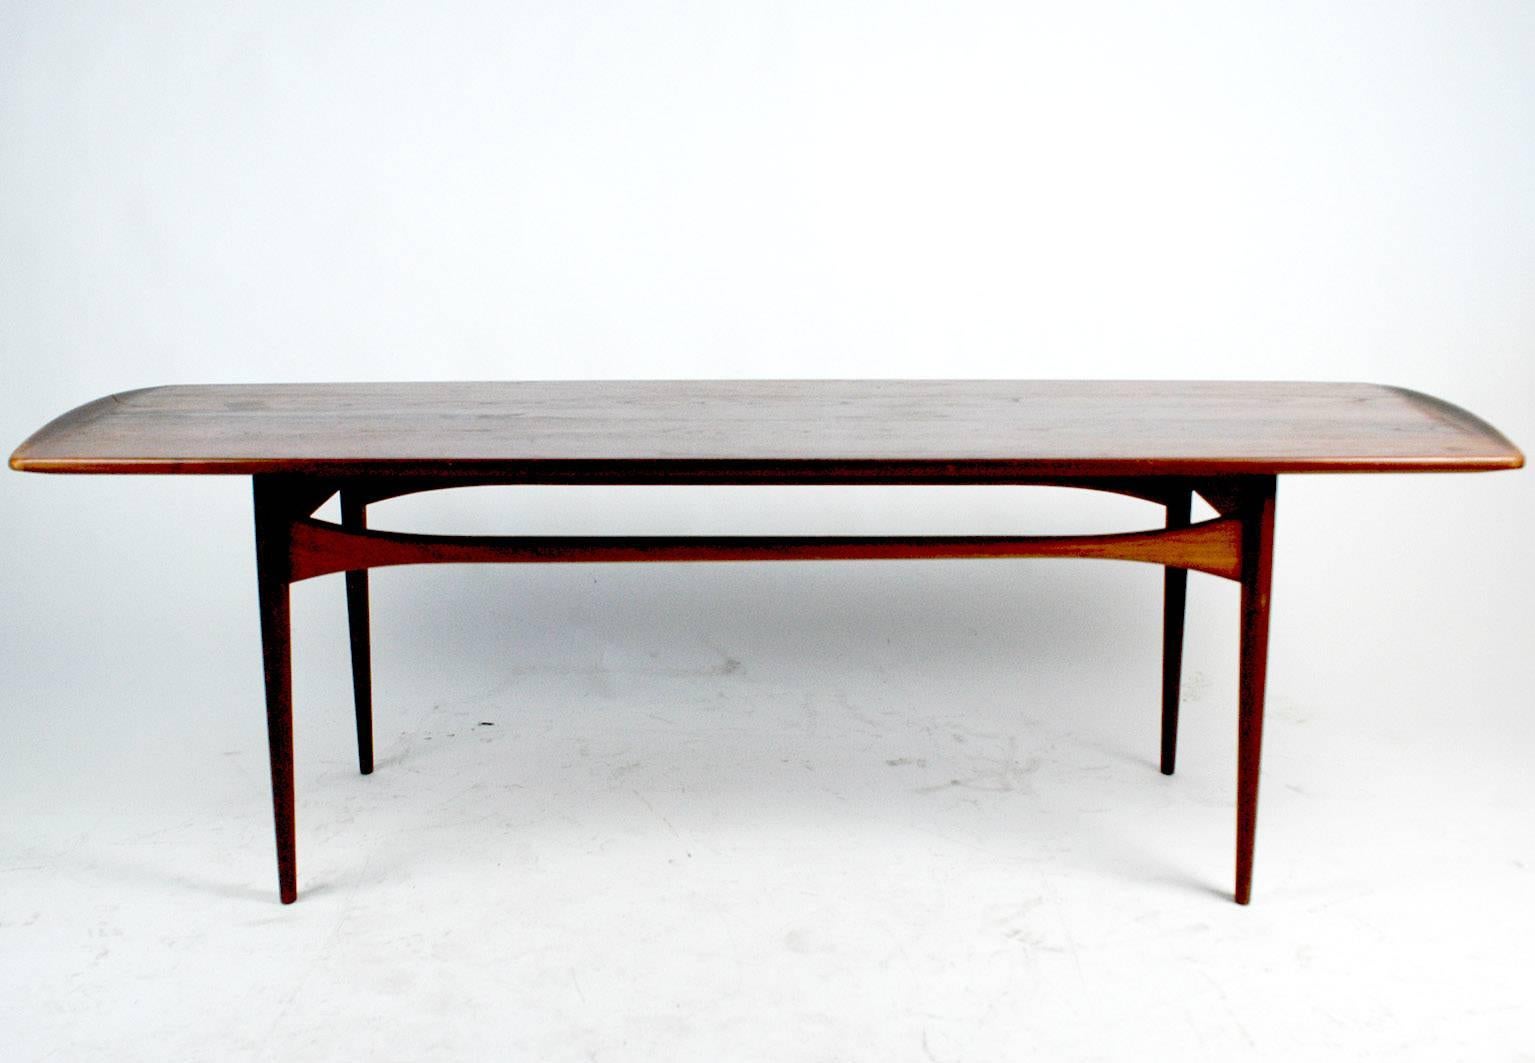 Excellent handcrafted coffee table designed in the 1950s by Tove & Edvard Kindt-Larsen for France & Daverkosen, the first founders of France & Son.
The top has a beautiful organic shape and shows just a few signs of wear due to its age.